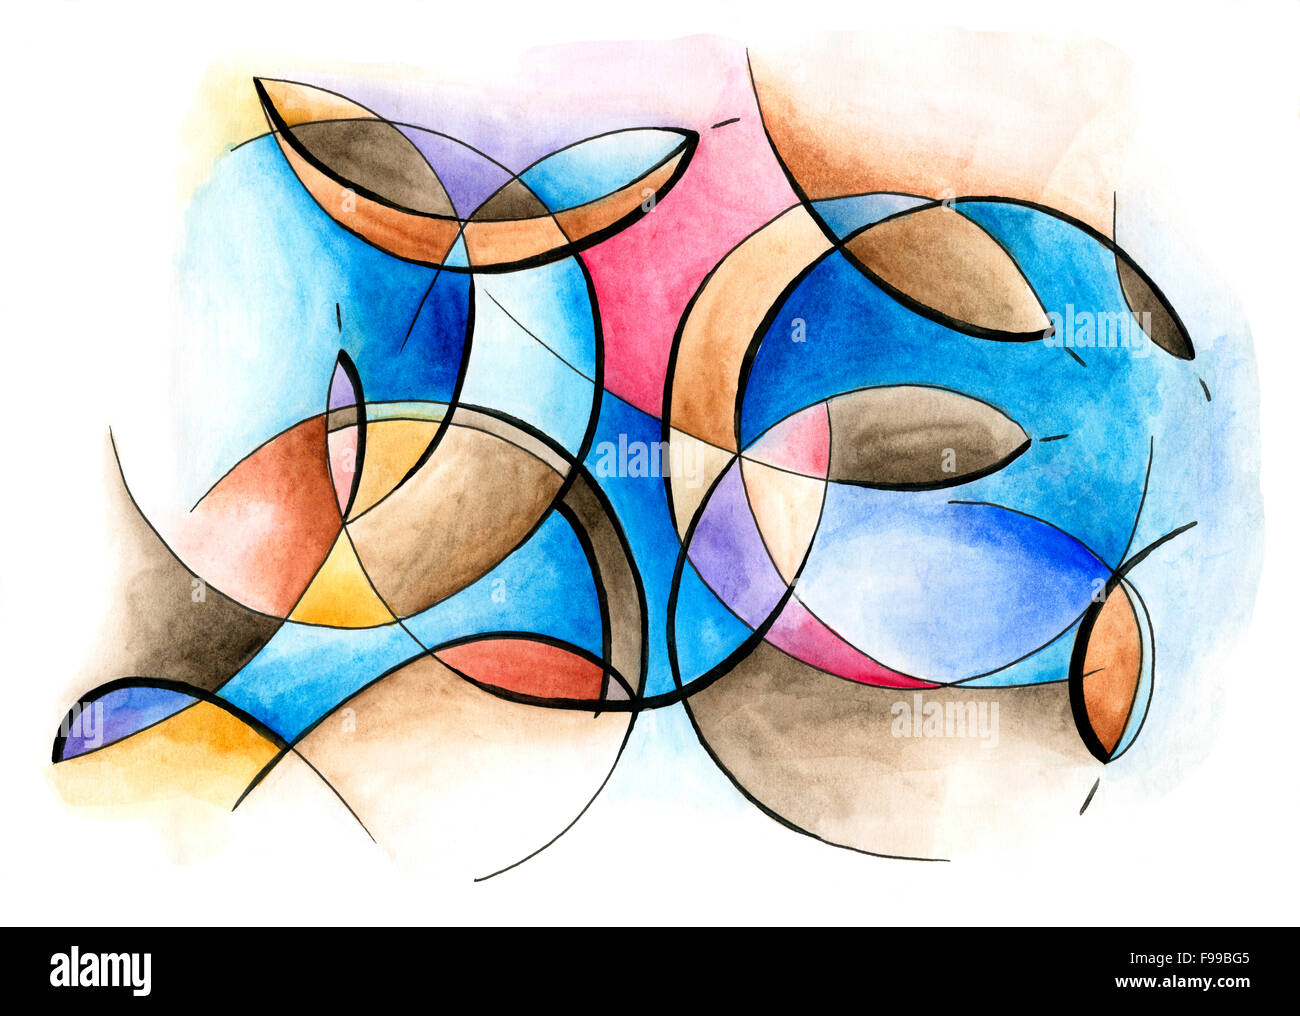 Abstract artwork with different spots, shapes and lines Stock Photo - Alamy